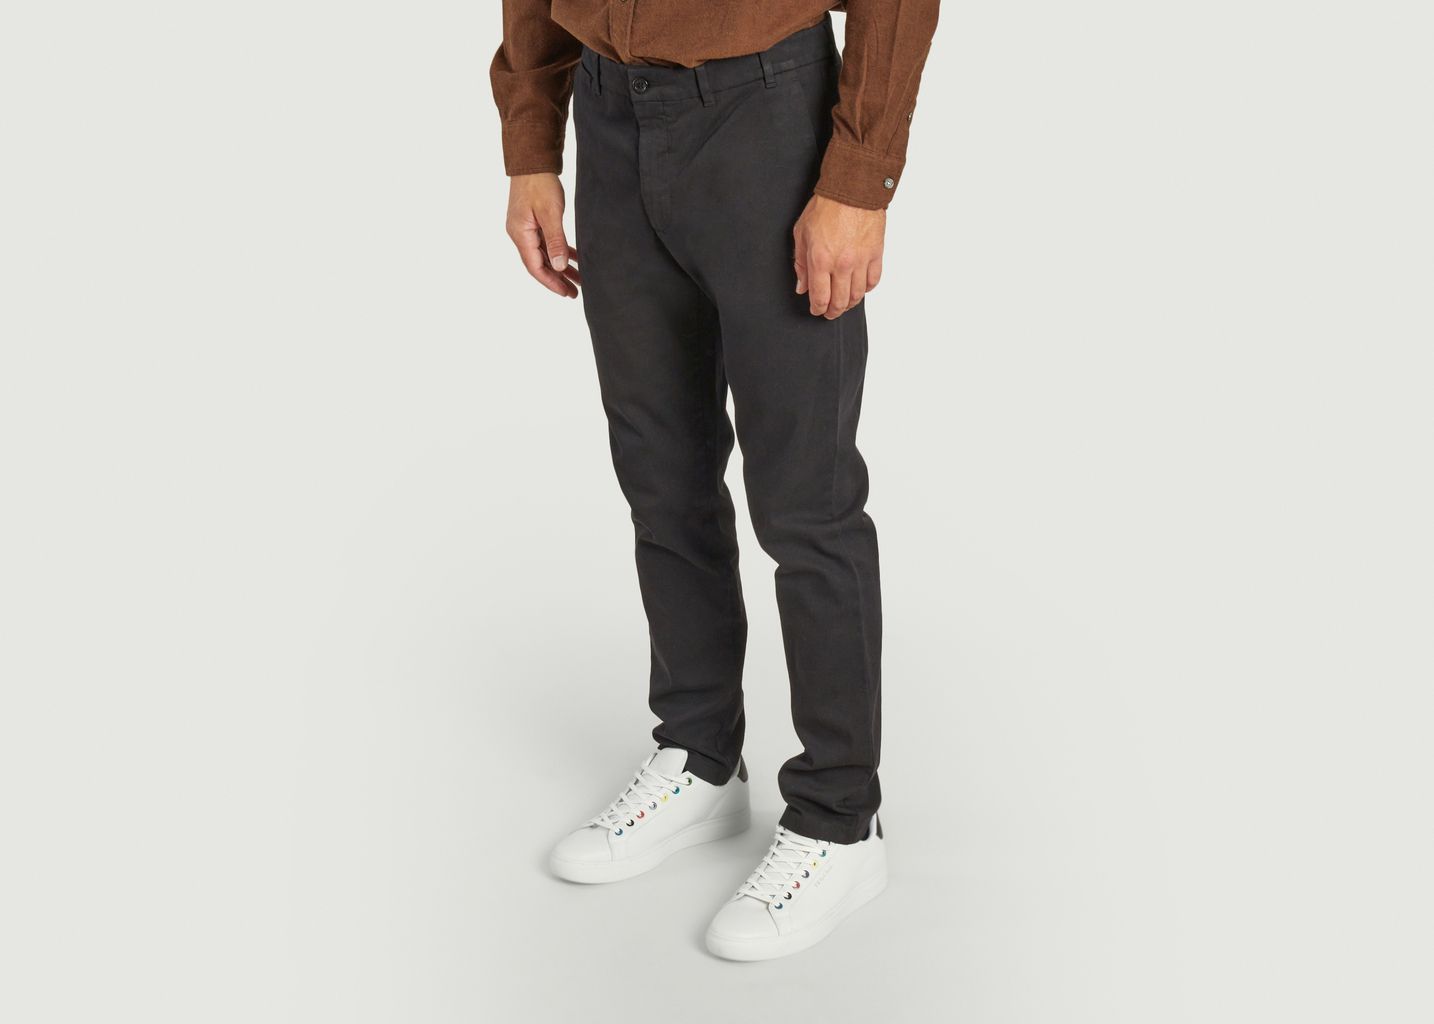 Aros Slim Pants - Norse Projects